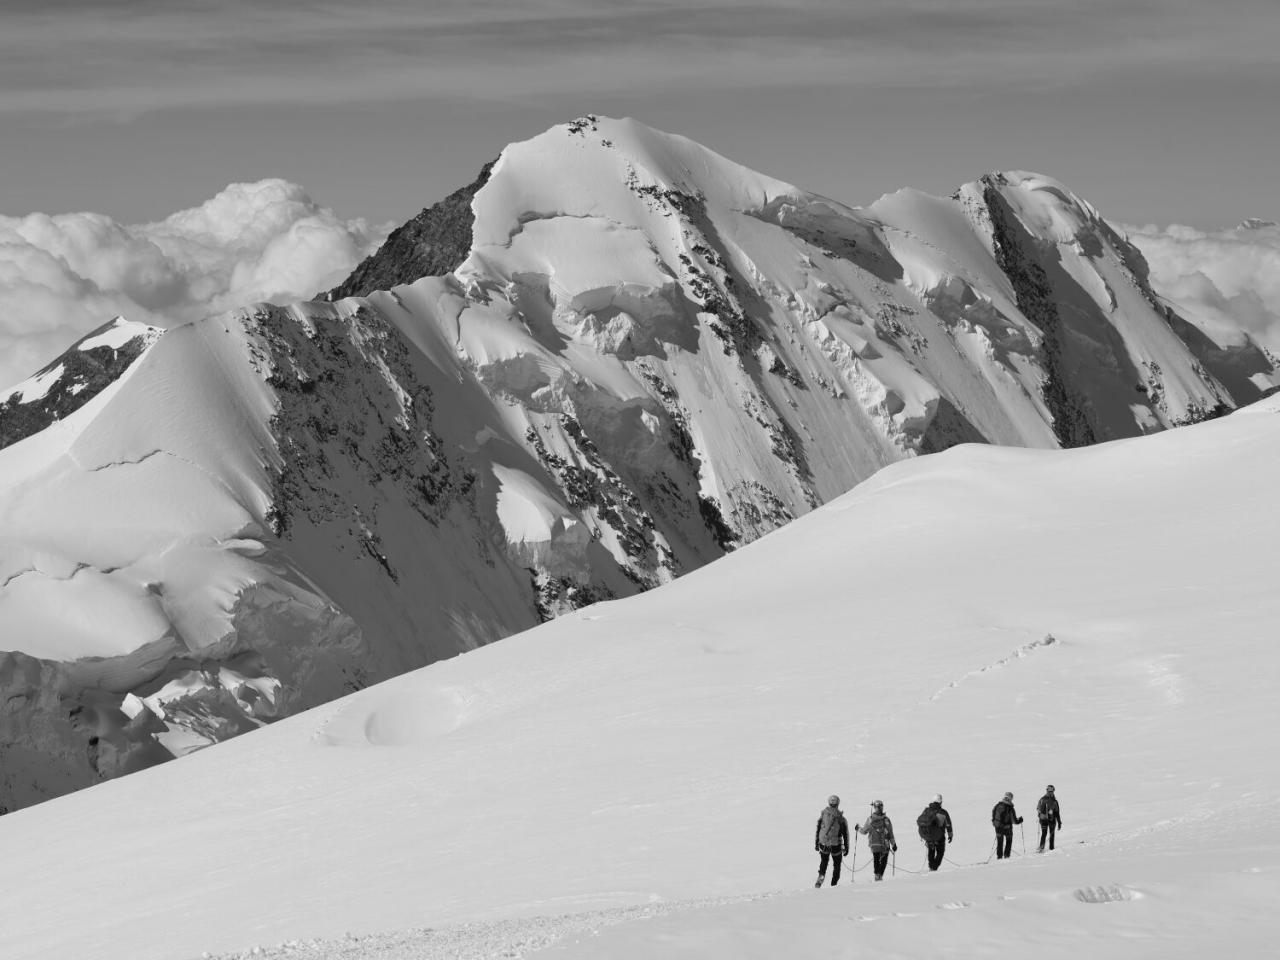 Climb of Mont Blanc in 5 days